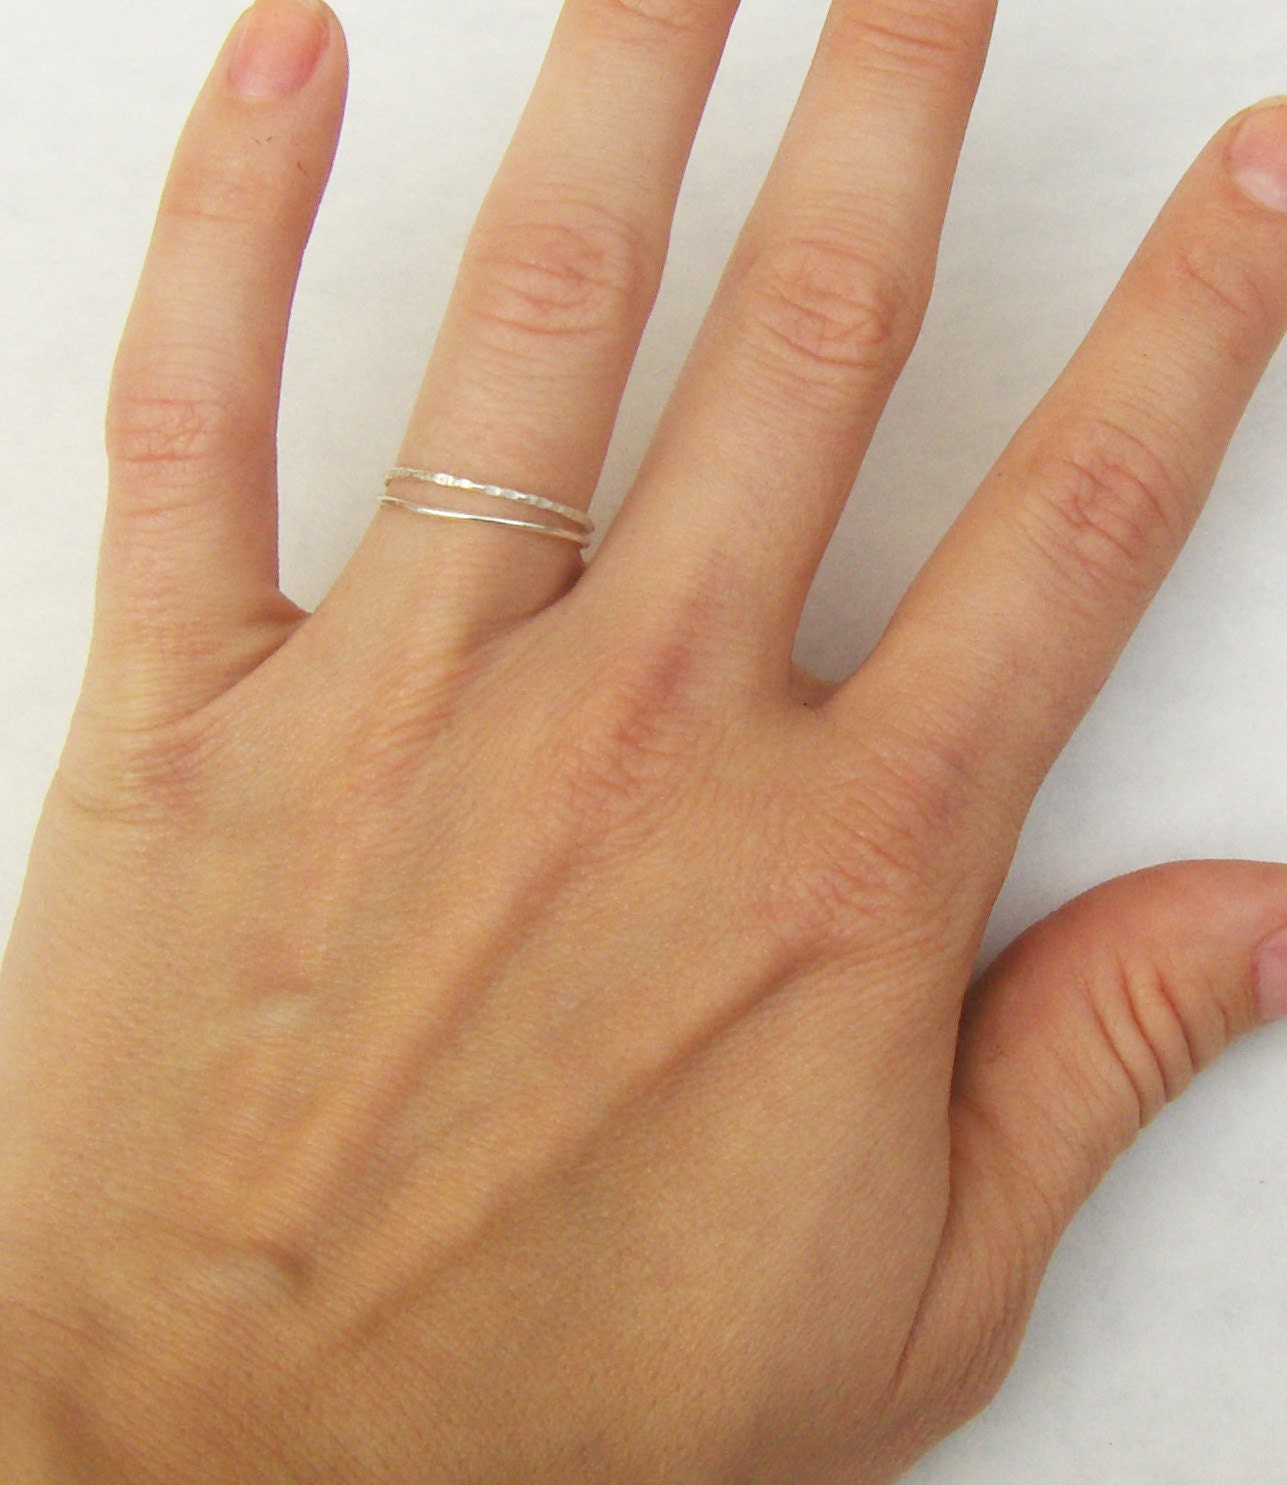 Set of 2 Simple Thin Sterling Silver Rings - Stackable